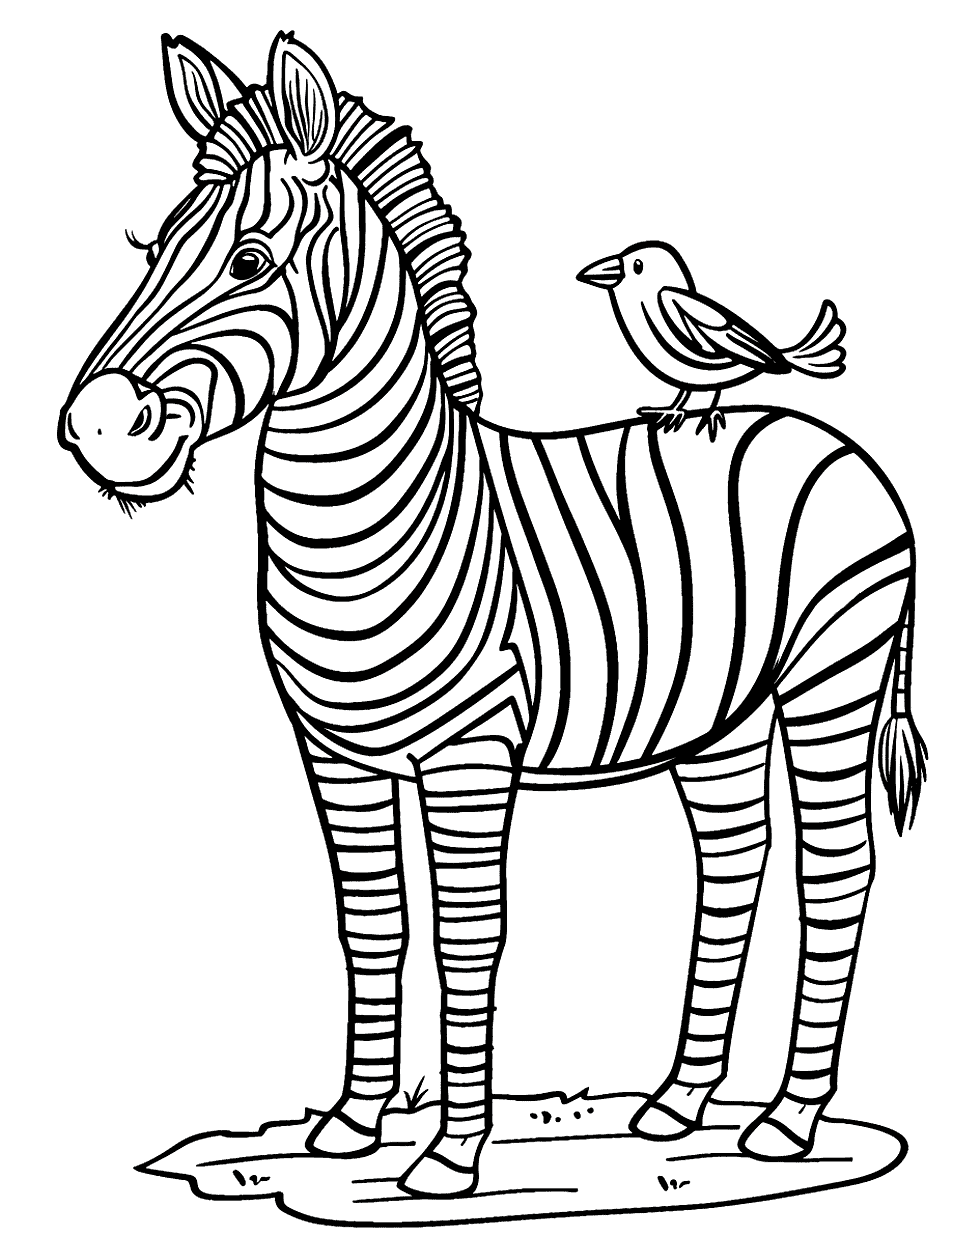 Zebra with Bird Coloring Page - A zebra with a small bird perched on its back.